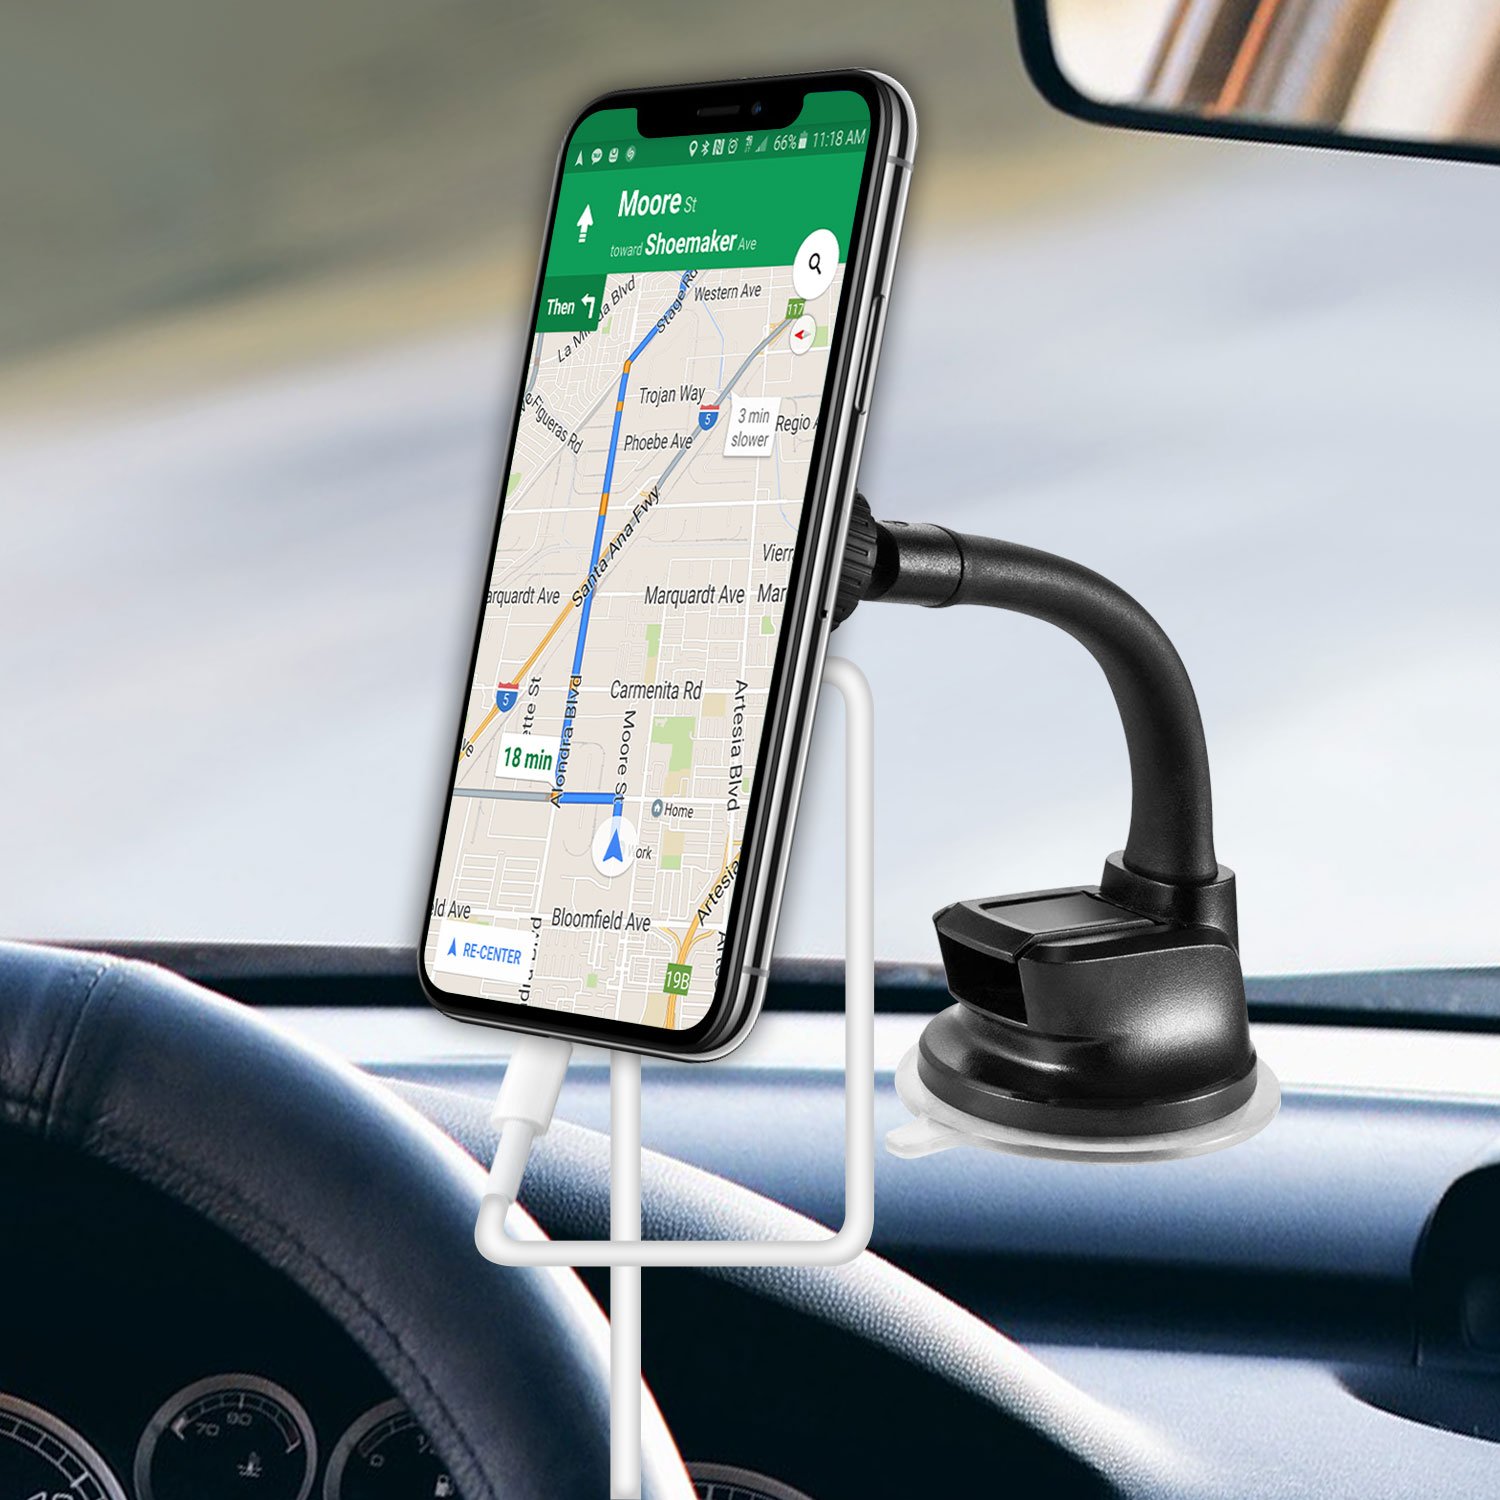 Cellet Suction Cup Dashboard and Windshield Mount Phone Cradle, Magnetic Phone Holder, Desk Mount with Flexible Goose Neck Compatible with iPhones Samsung Galaxy, Note, Motorola Moto, Google Pixel